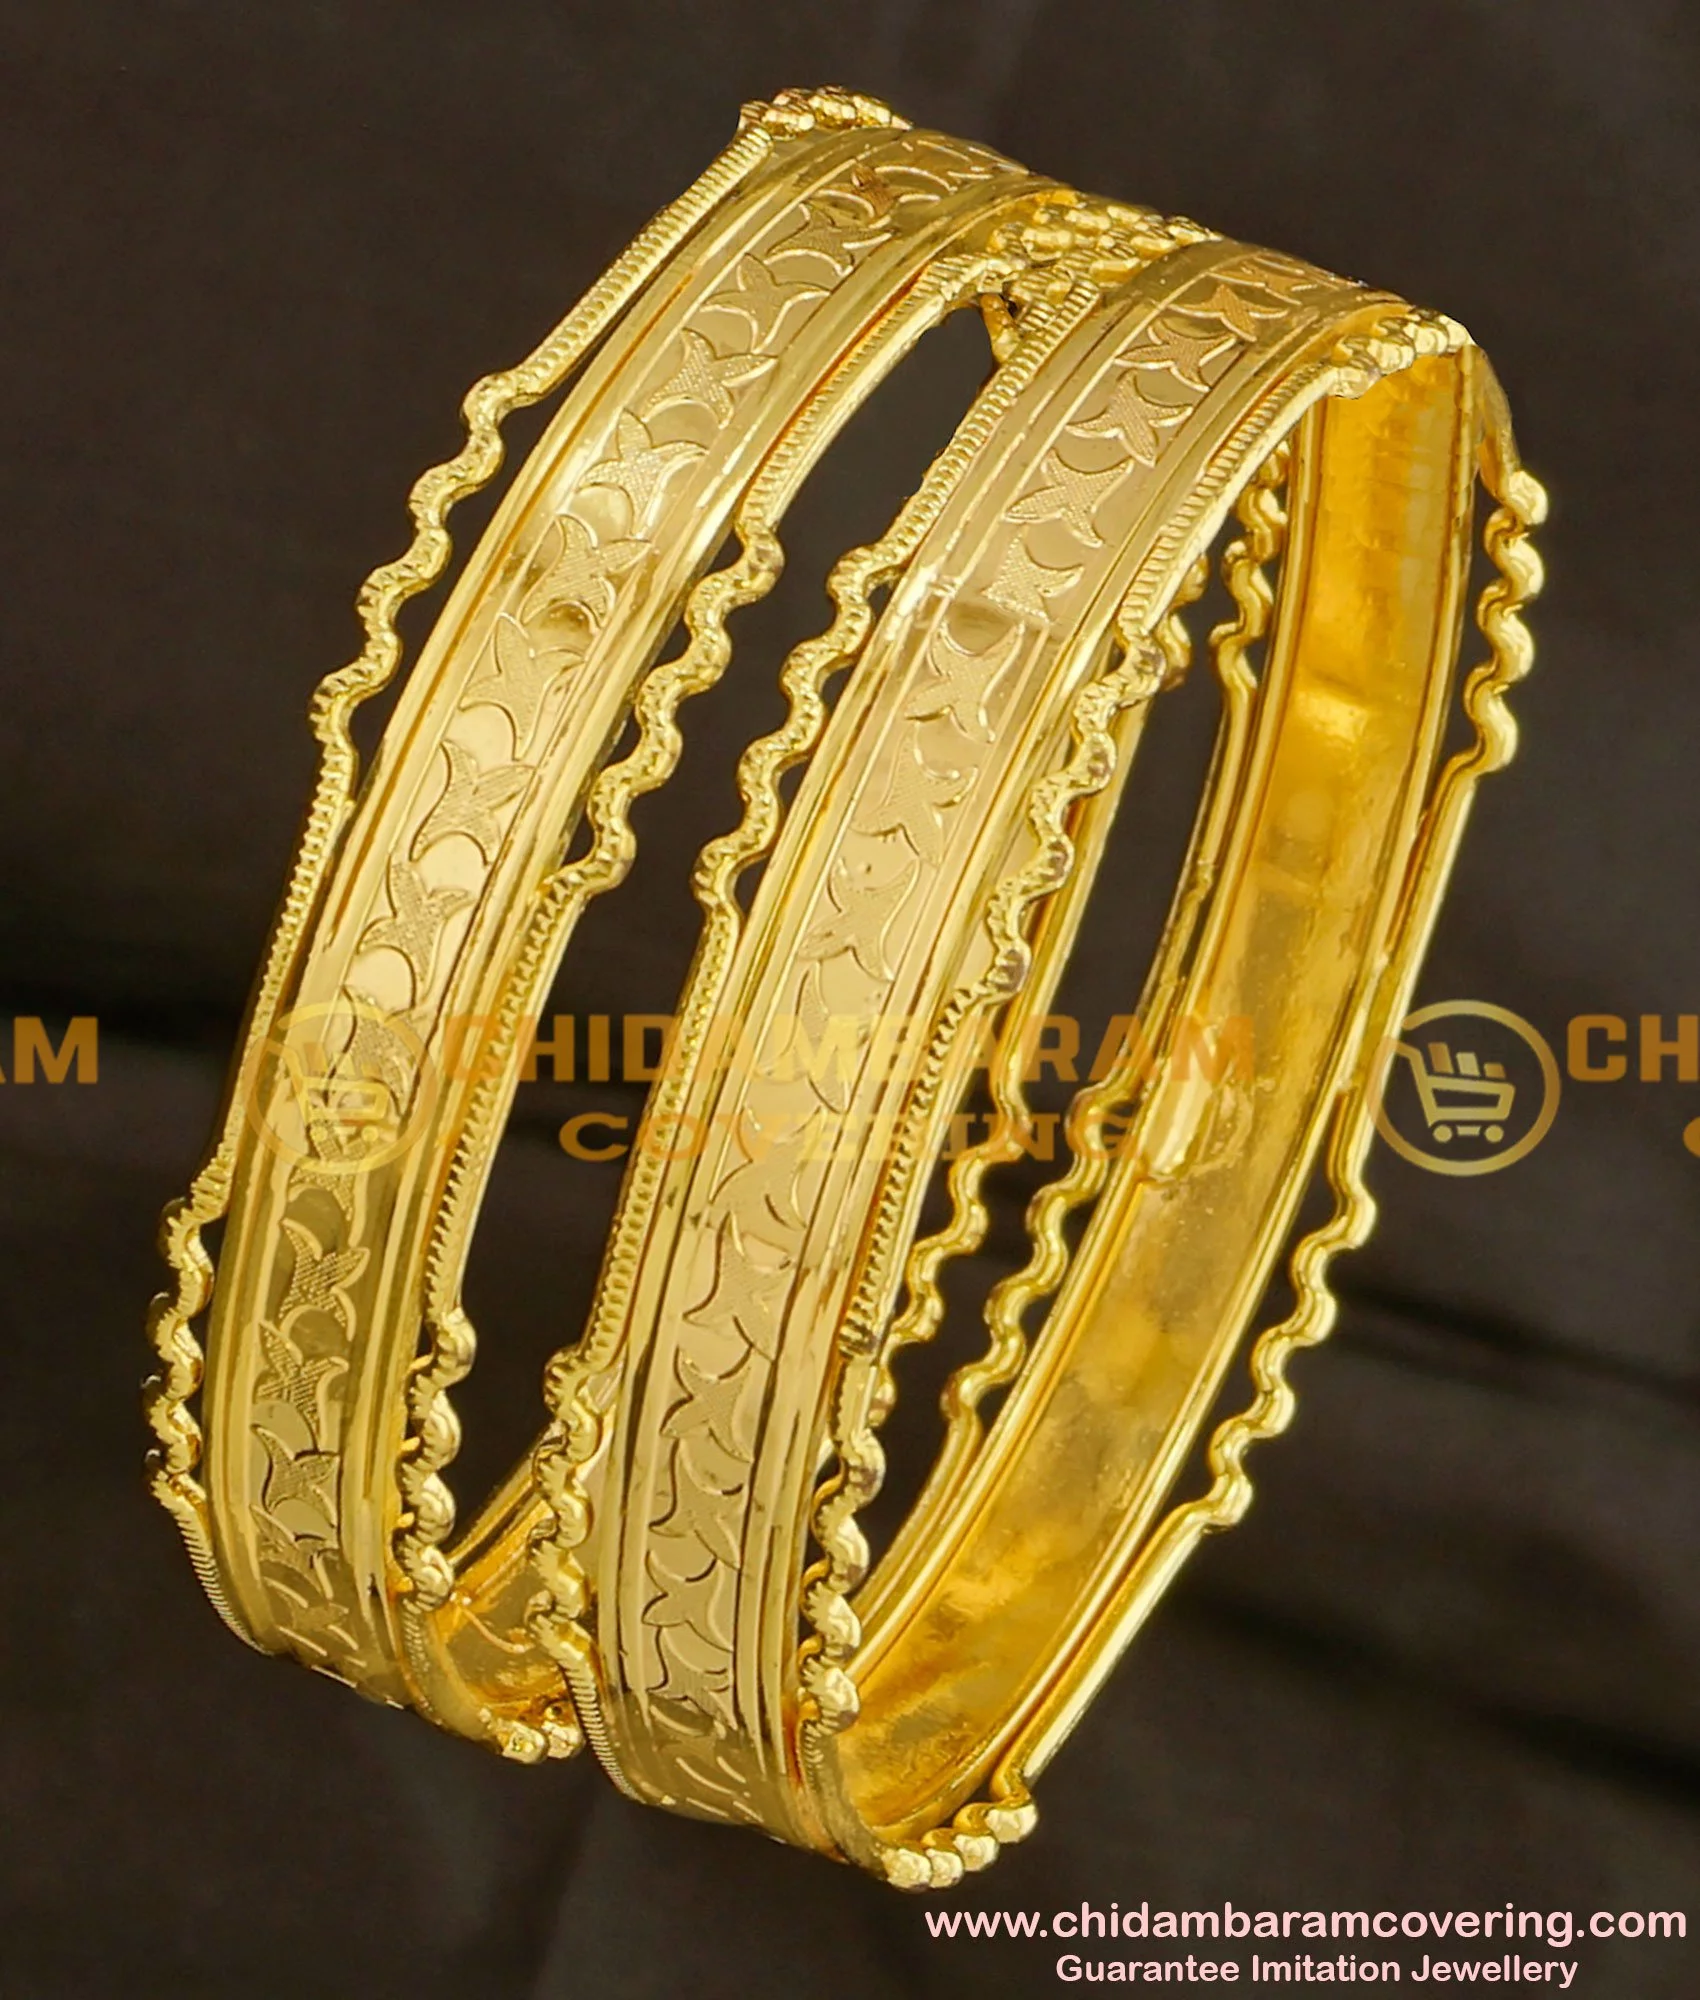 Stunning looking gold plated bangle